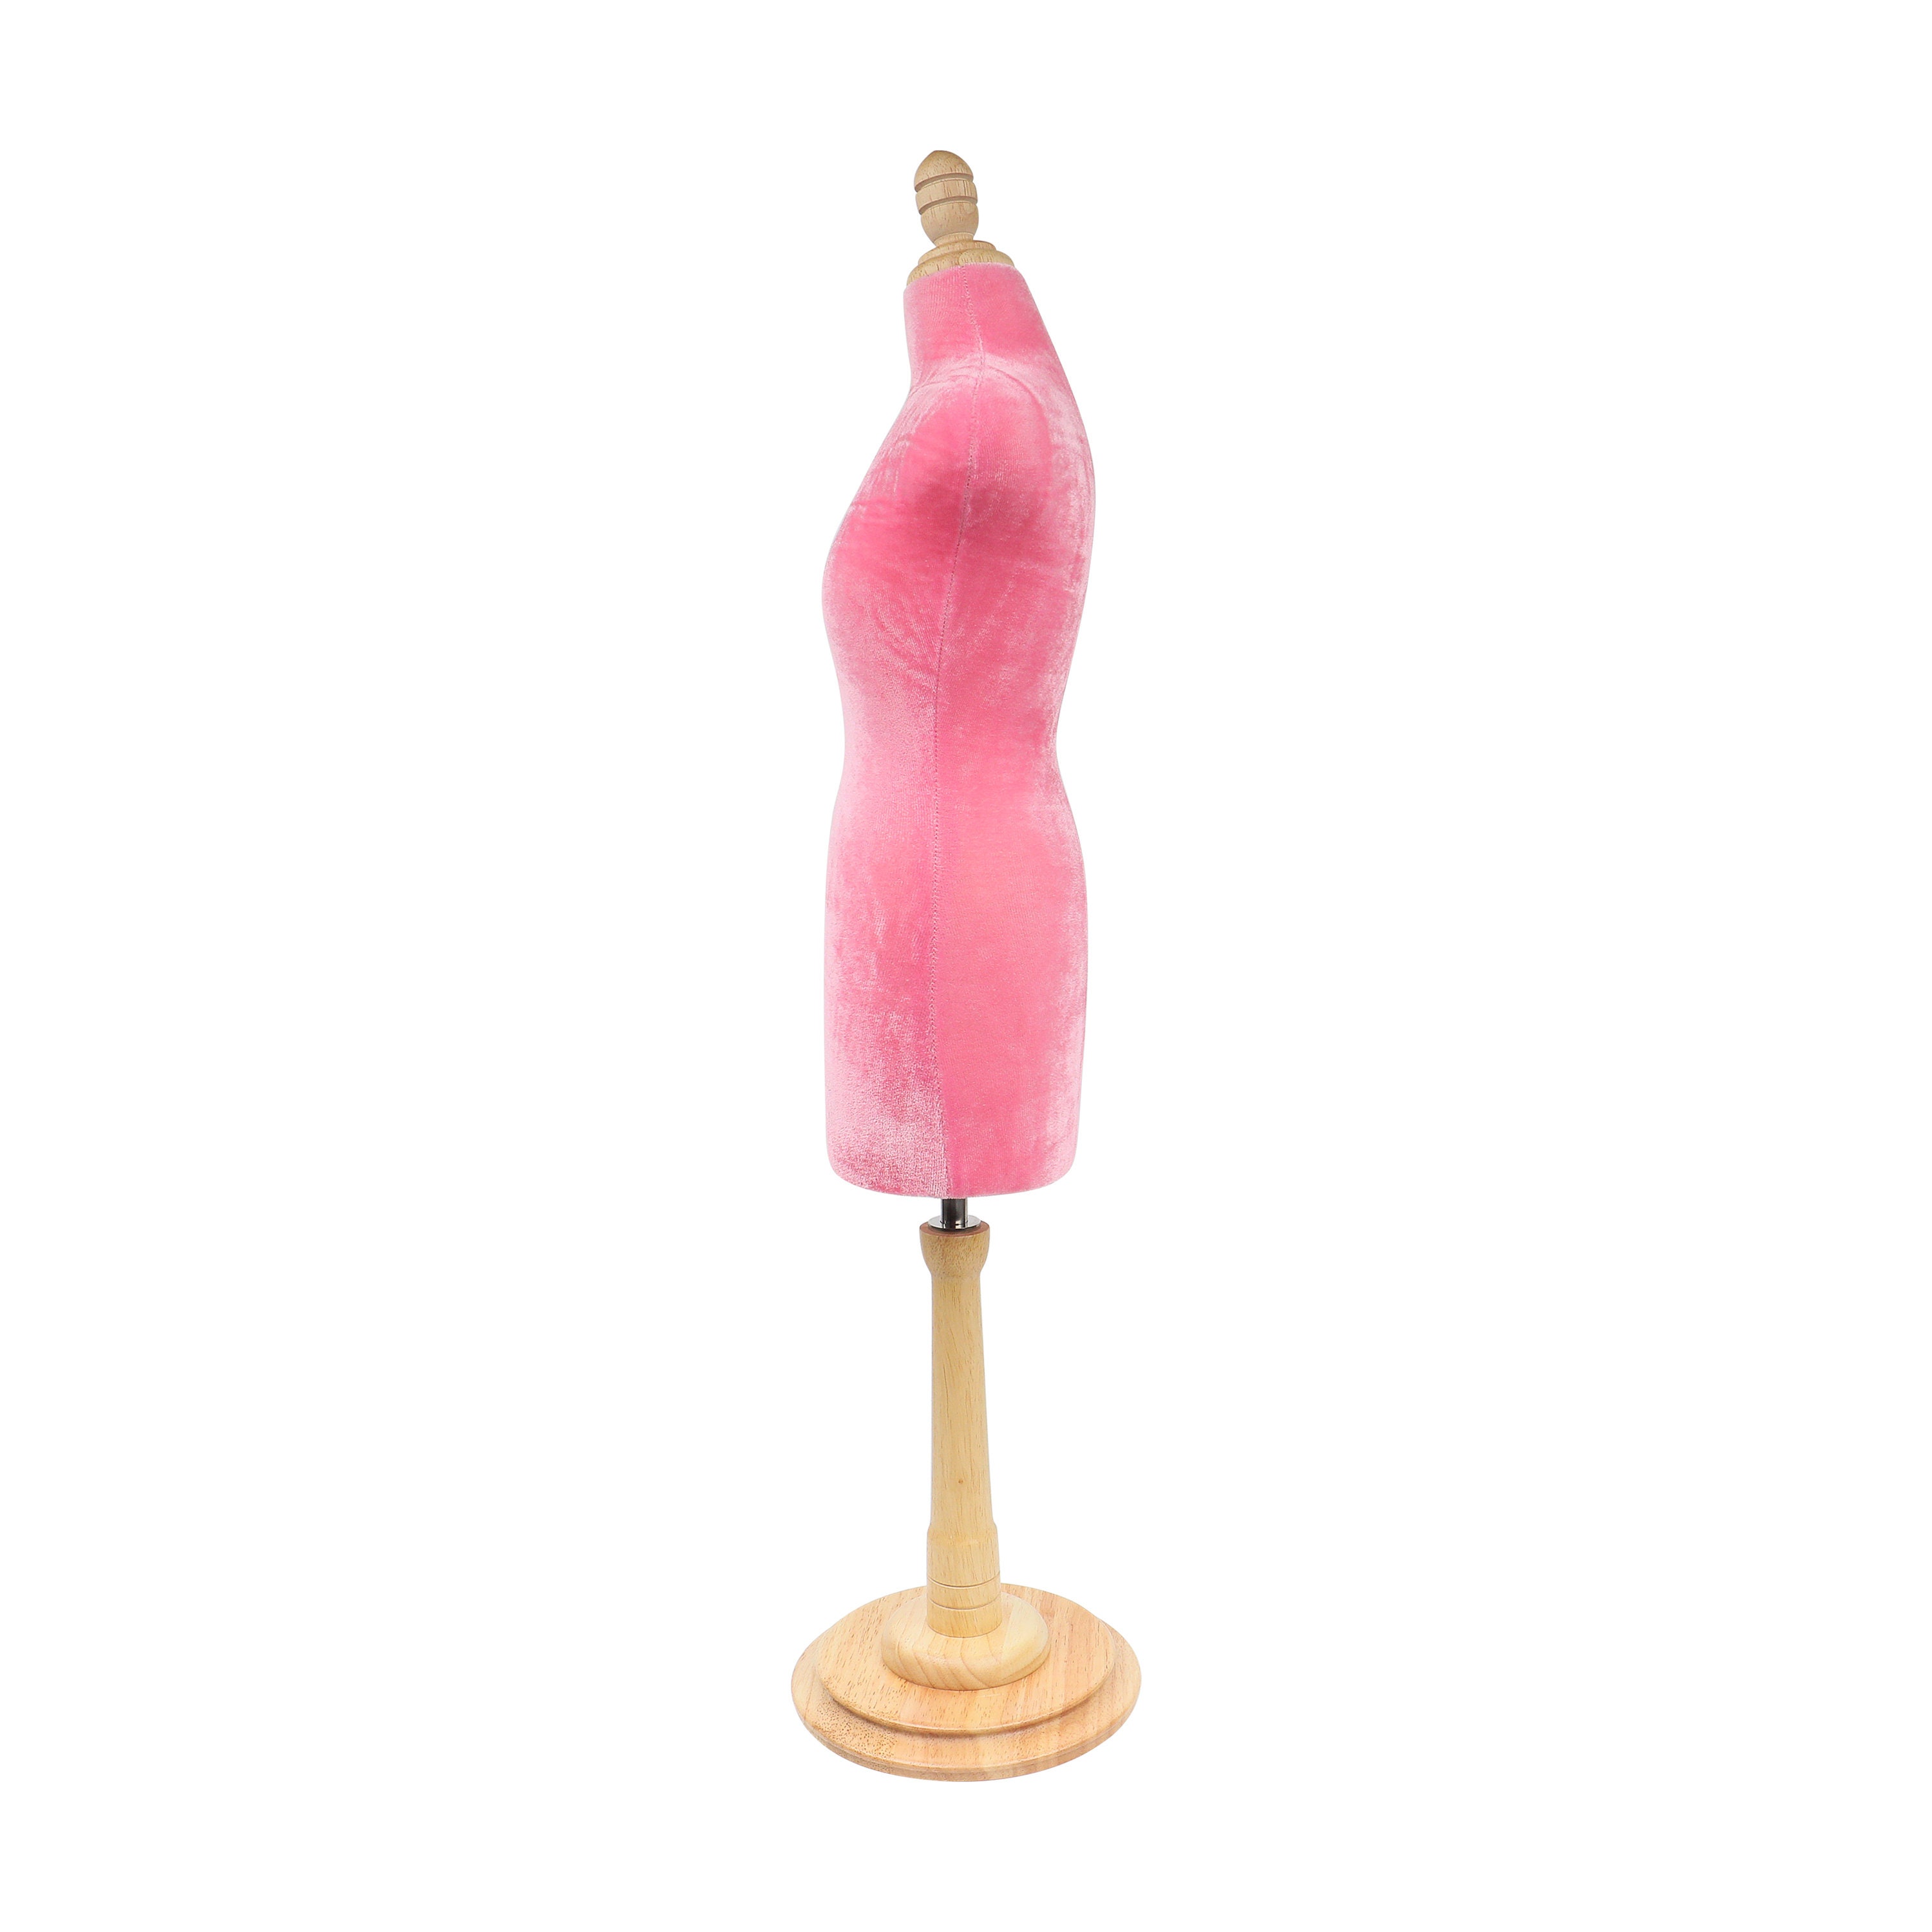 DL803 Half Scale Mini Dress Form Pink Velvet Mannequin Miniature Dressmaker  Dummy for Sewing, Jewelry Display Stand Holder Model With Wooden 